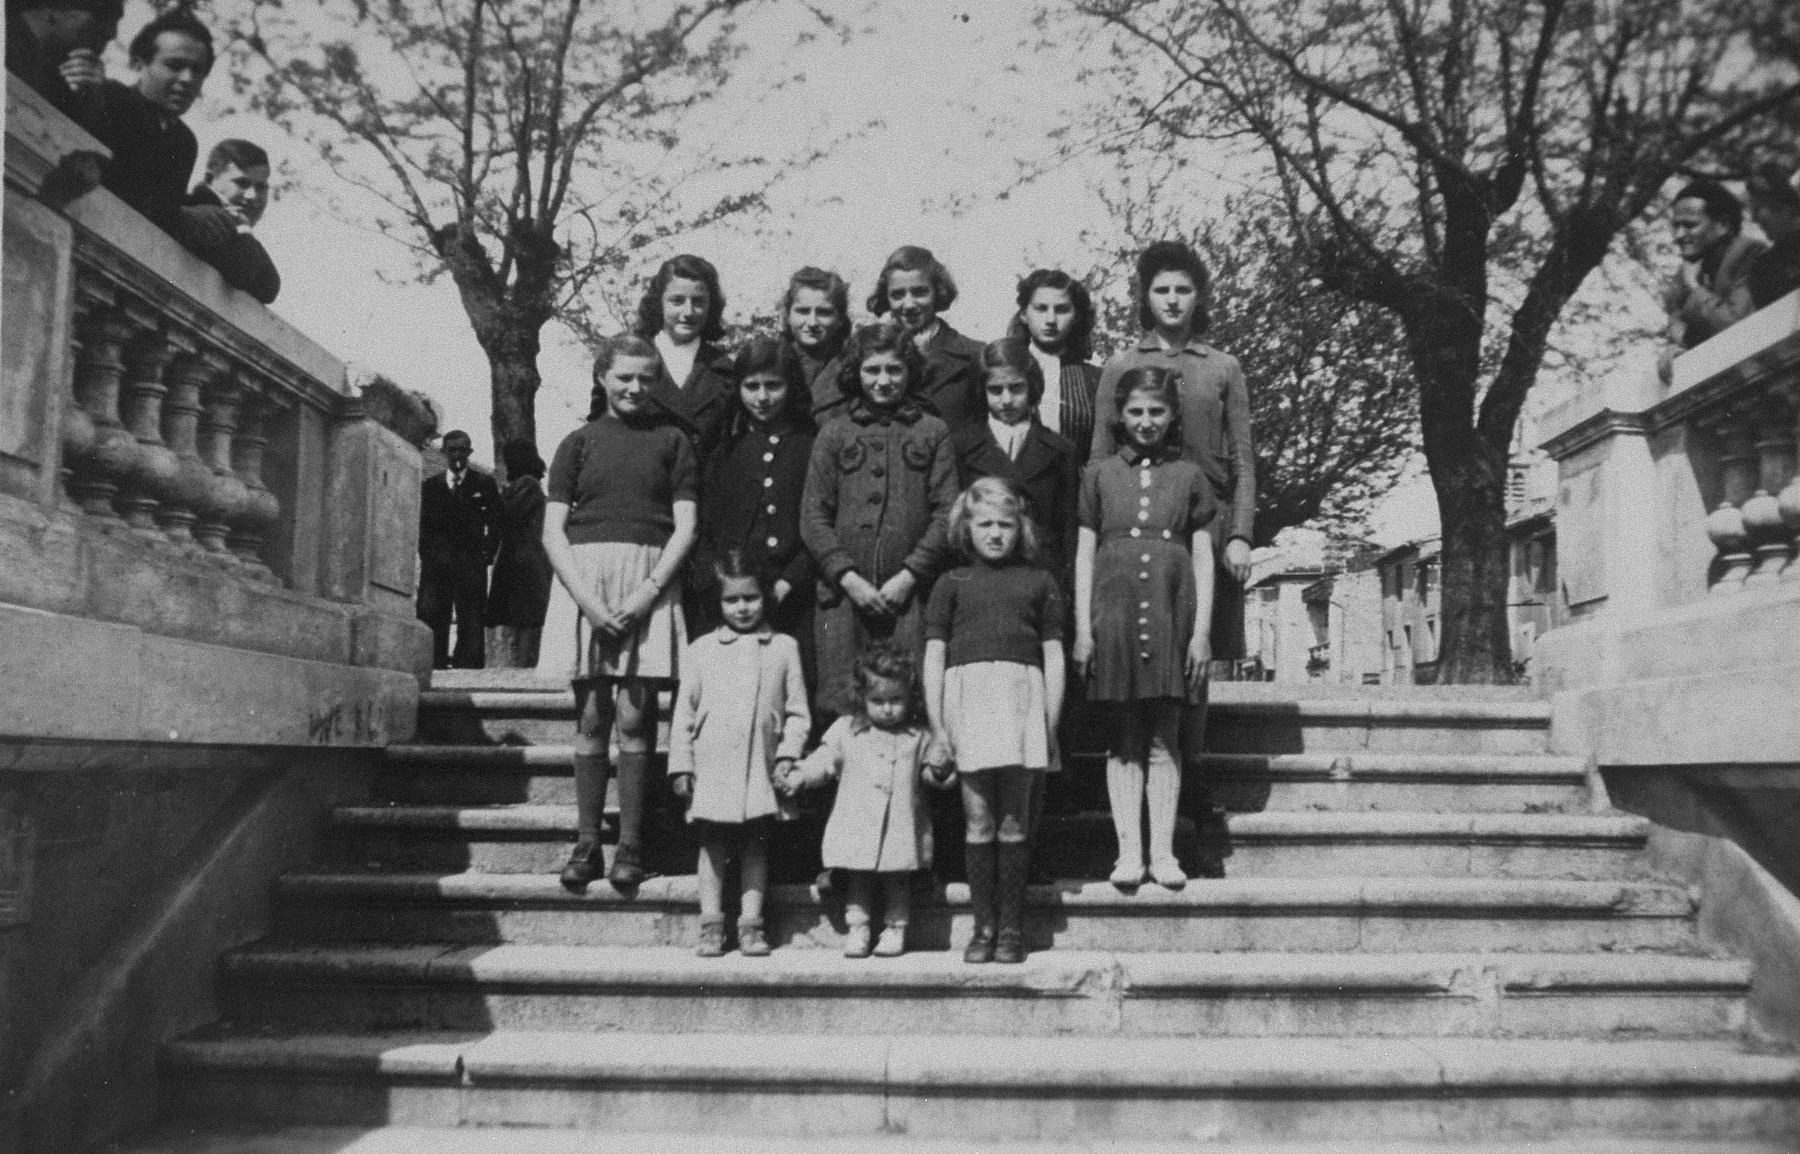 Group portrait of Jewish refugee children sheltered at the OSE children's home in Montagnac.